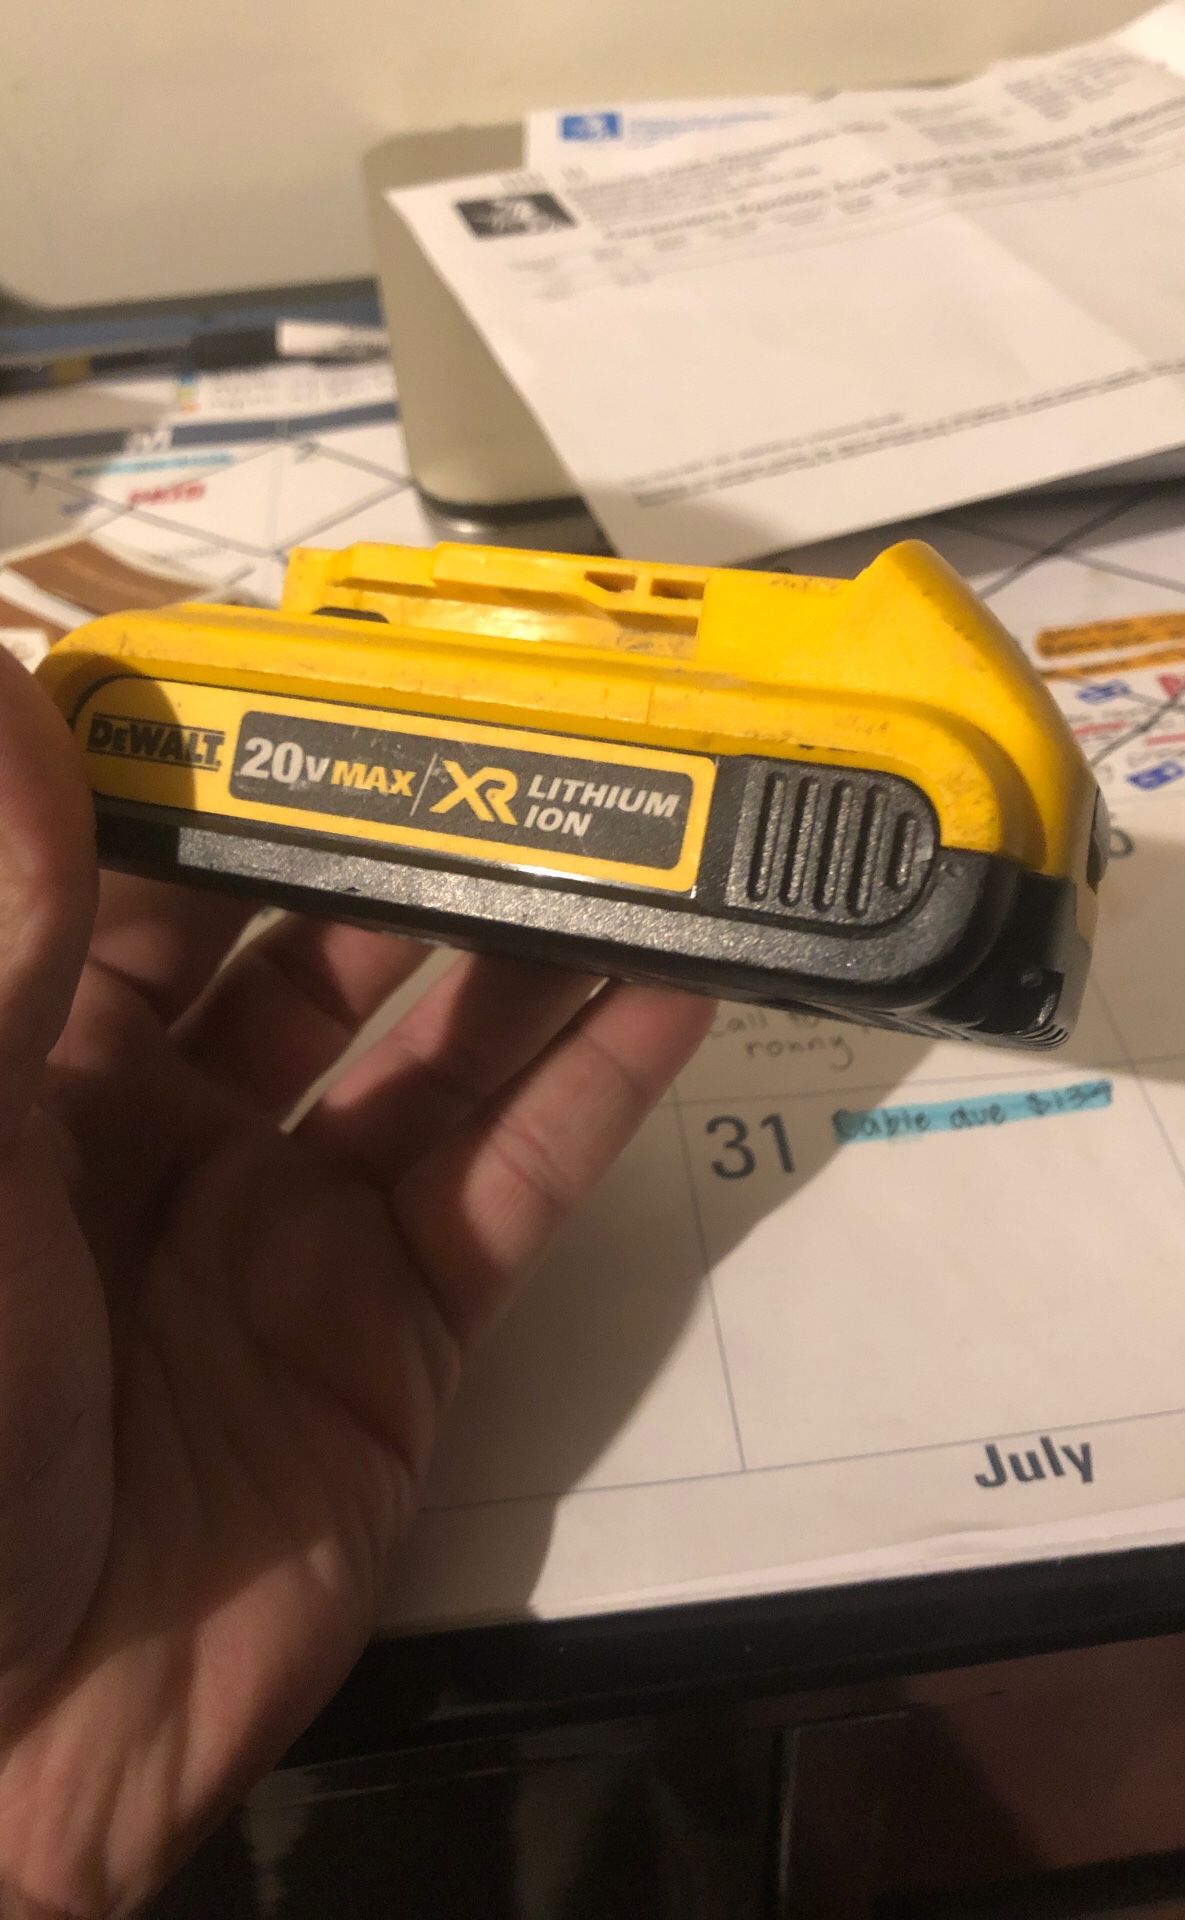 Dewalt 20v battery does not charge, almost new do not know what the problem is